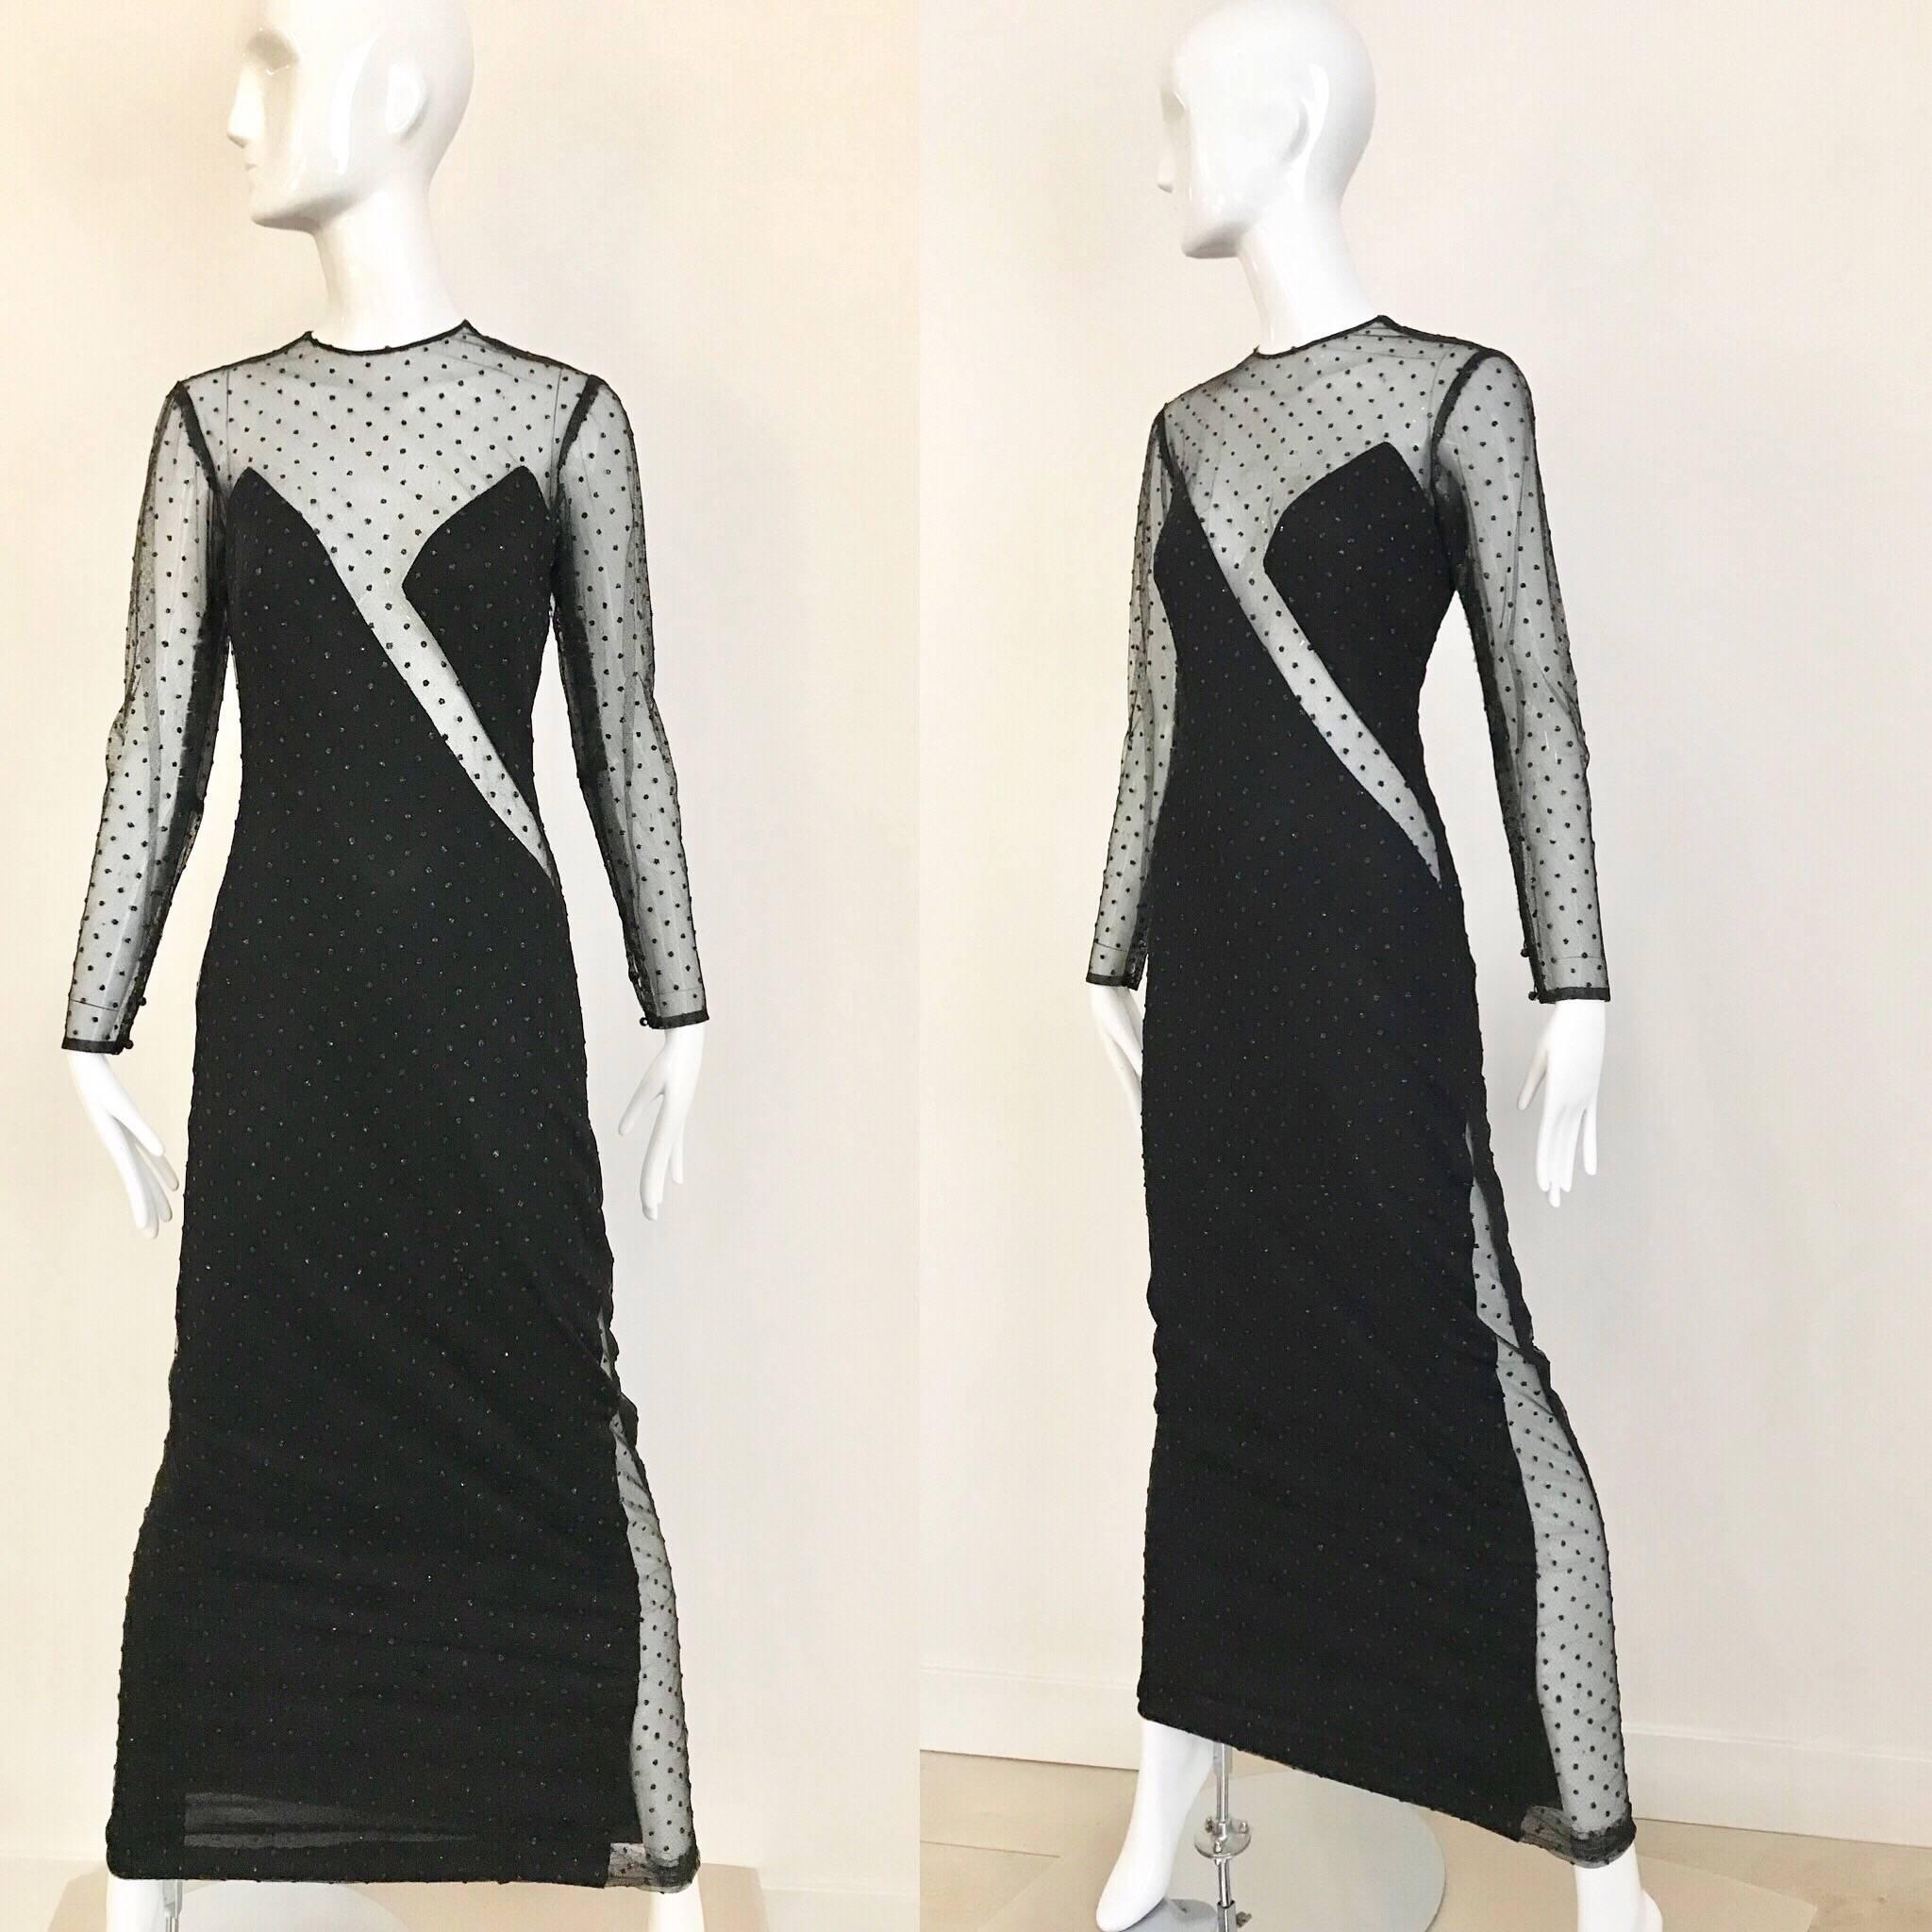 This Sexy 80's Loris Azzaro black mesh cut-out evening gown is quite daring. The cut-out starts from your left ankle and travels up to your left hip, then starts again, and travels up the bodice towards your right shoulder . There is also one long